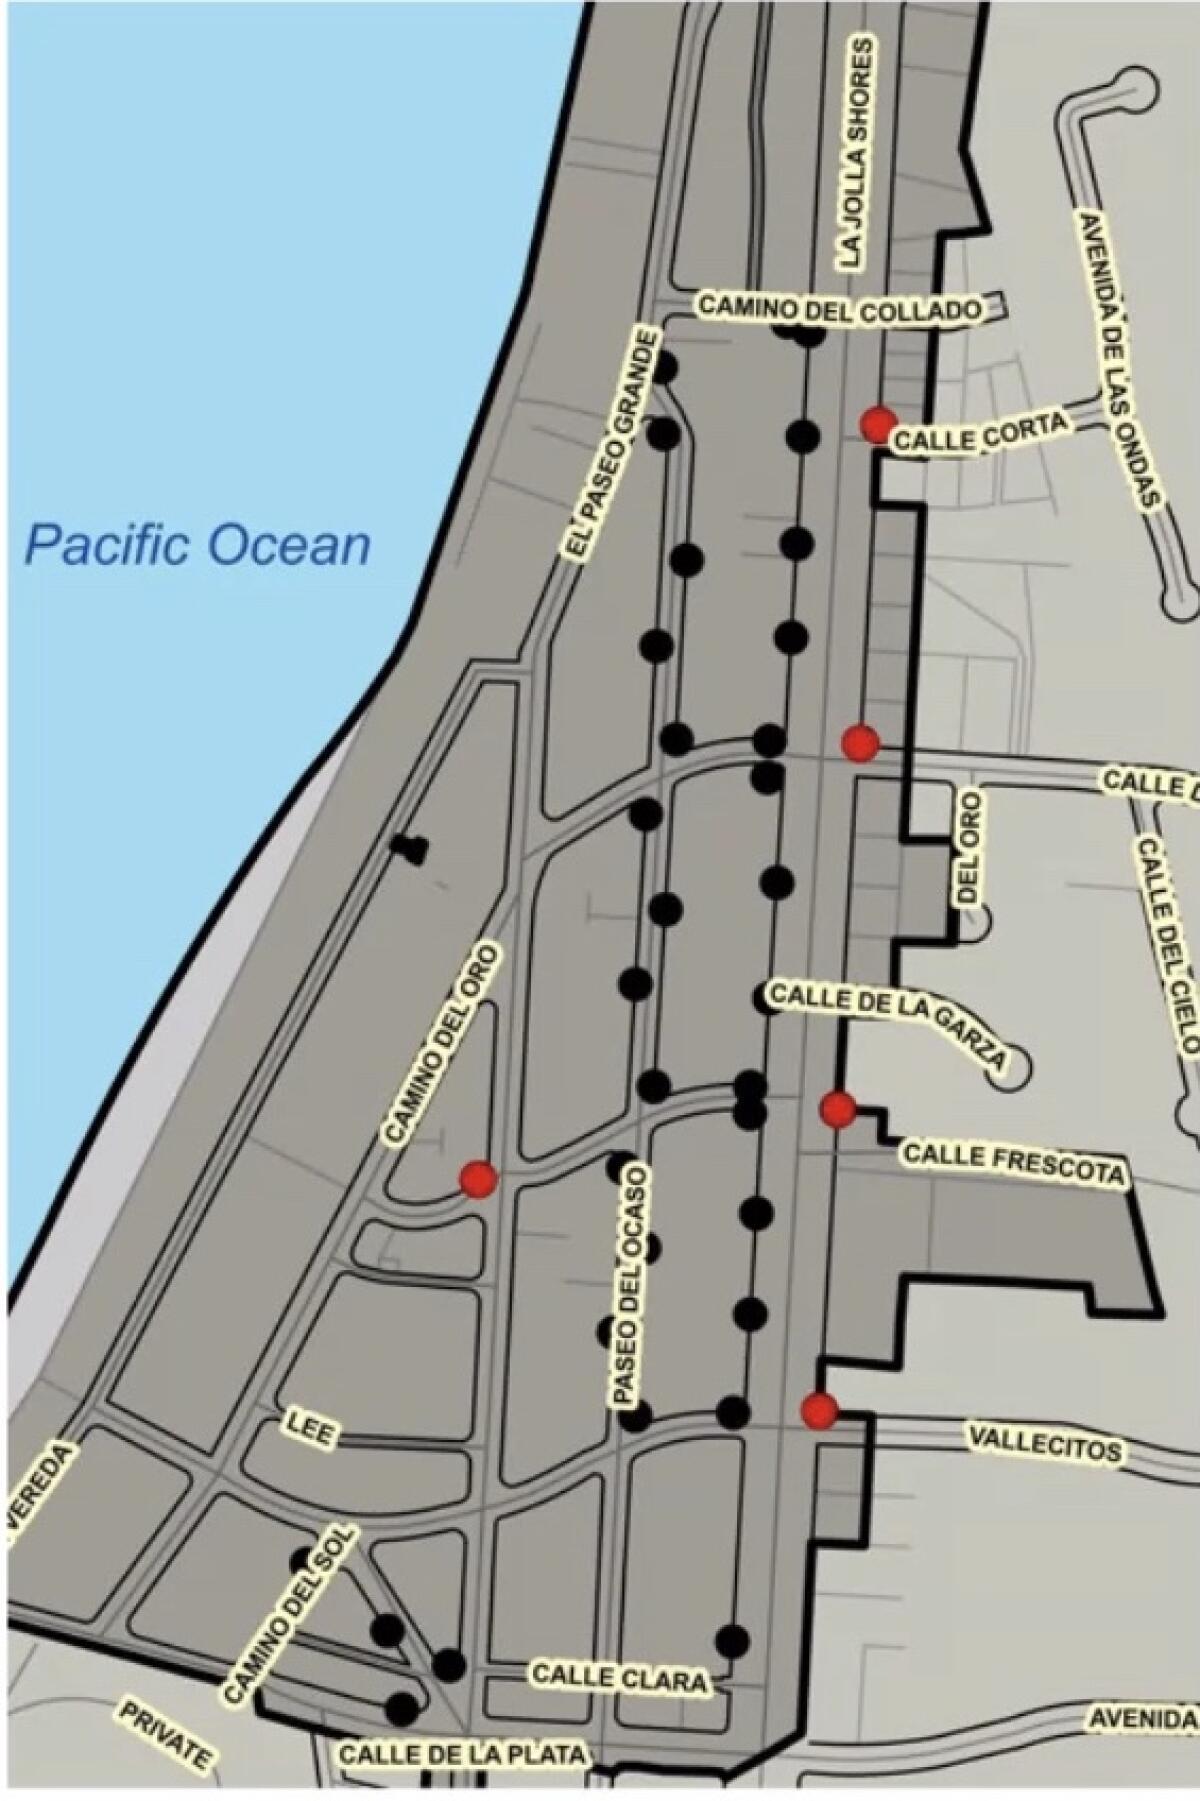 La Jolla Shores will get 37 replaced or new streetlights in the area shown; 